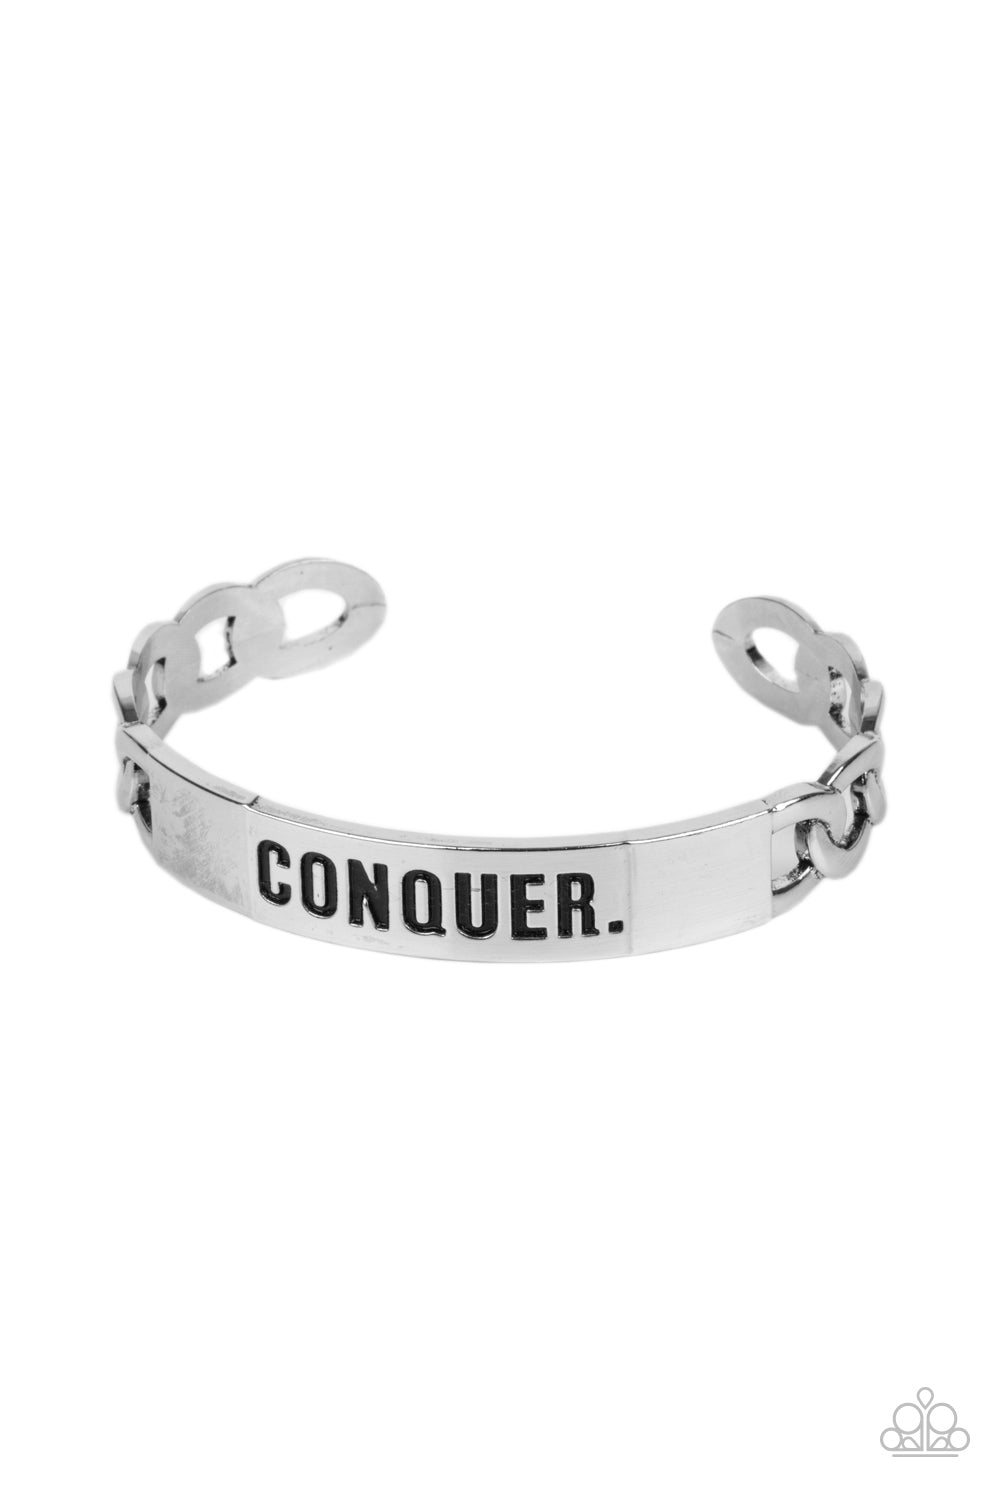 Paparazzi Jewelry & Accessories - Conquer Your Fears - Silver Bracelet. Bling By Titia Boutique